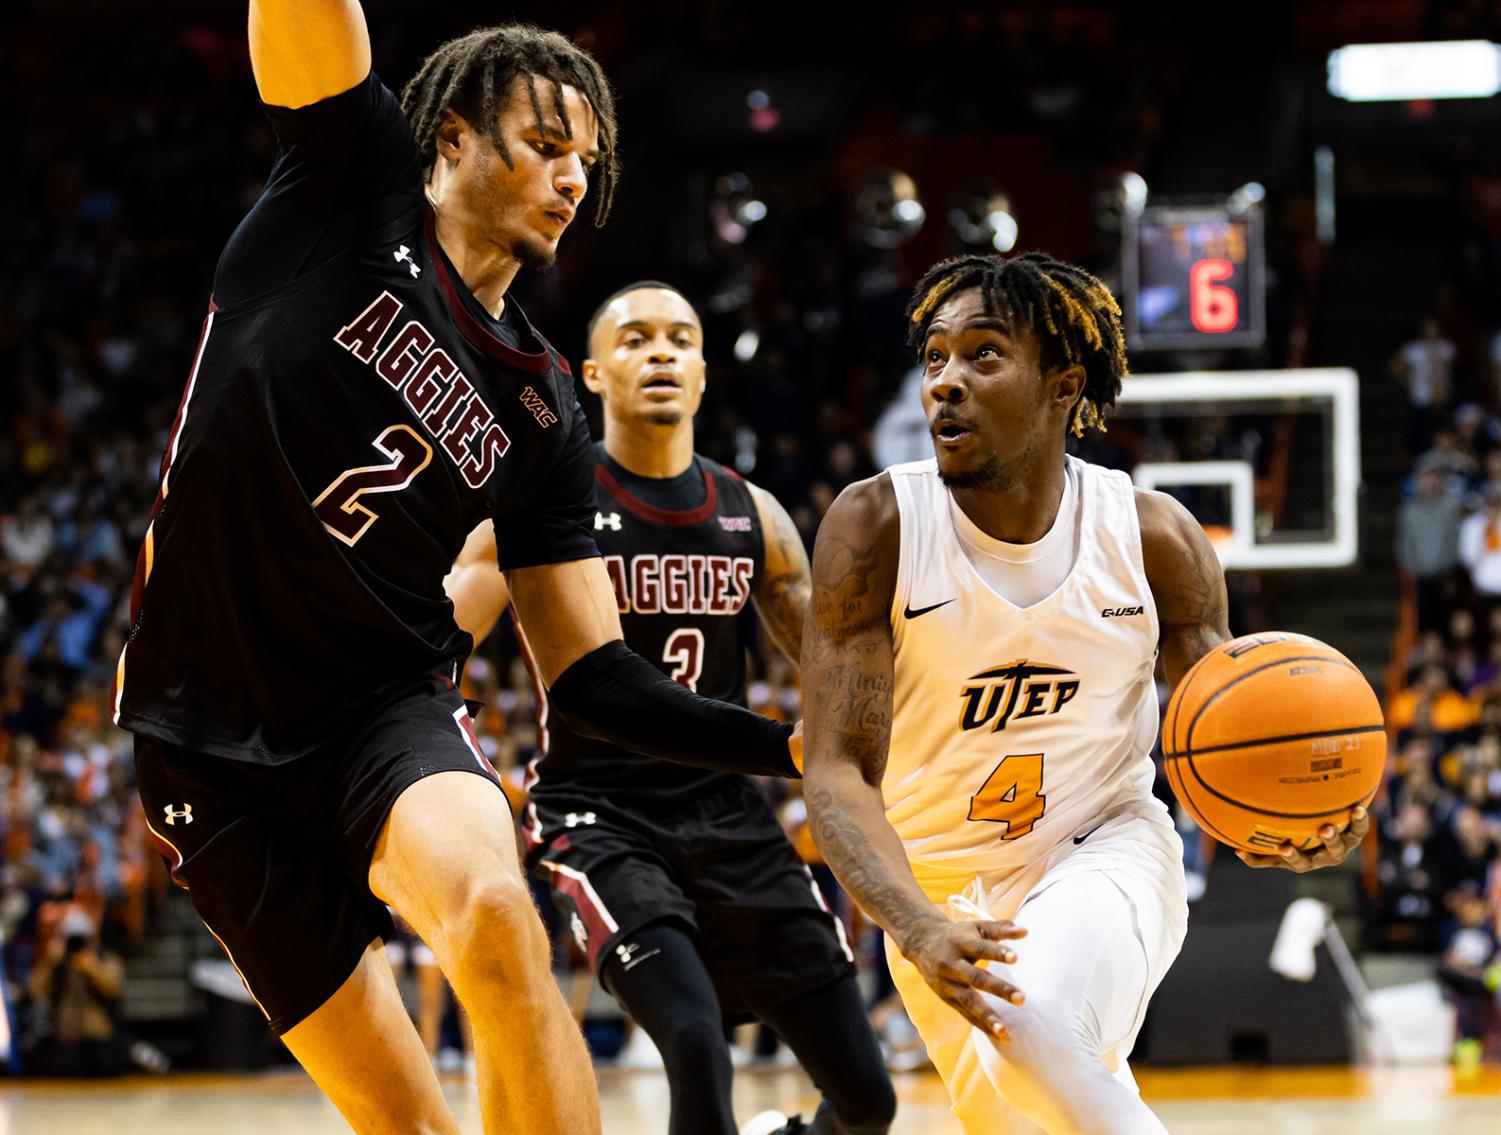 Battle+of+I-10+tips+off+at+the+Don+Haskins+Center